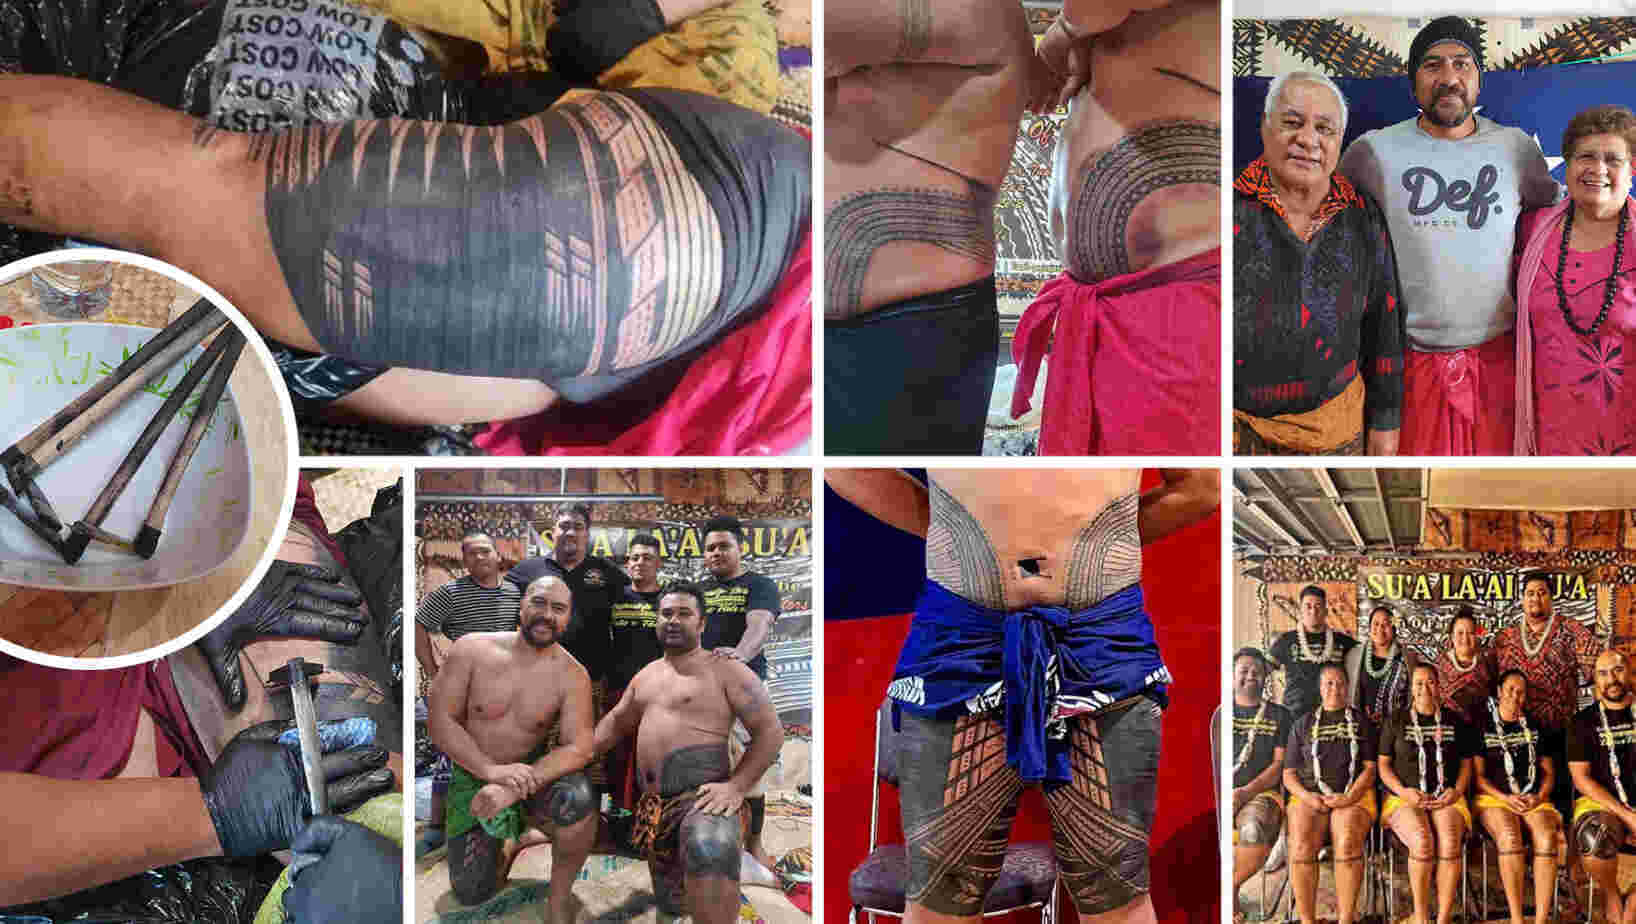 A player’s pride and pain of getting their traditional full body Samoan Tattoo -Malofie tatau